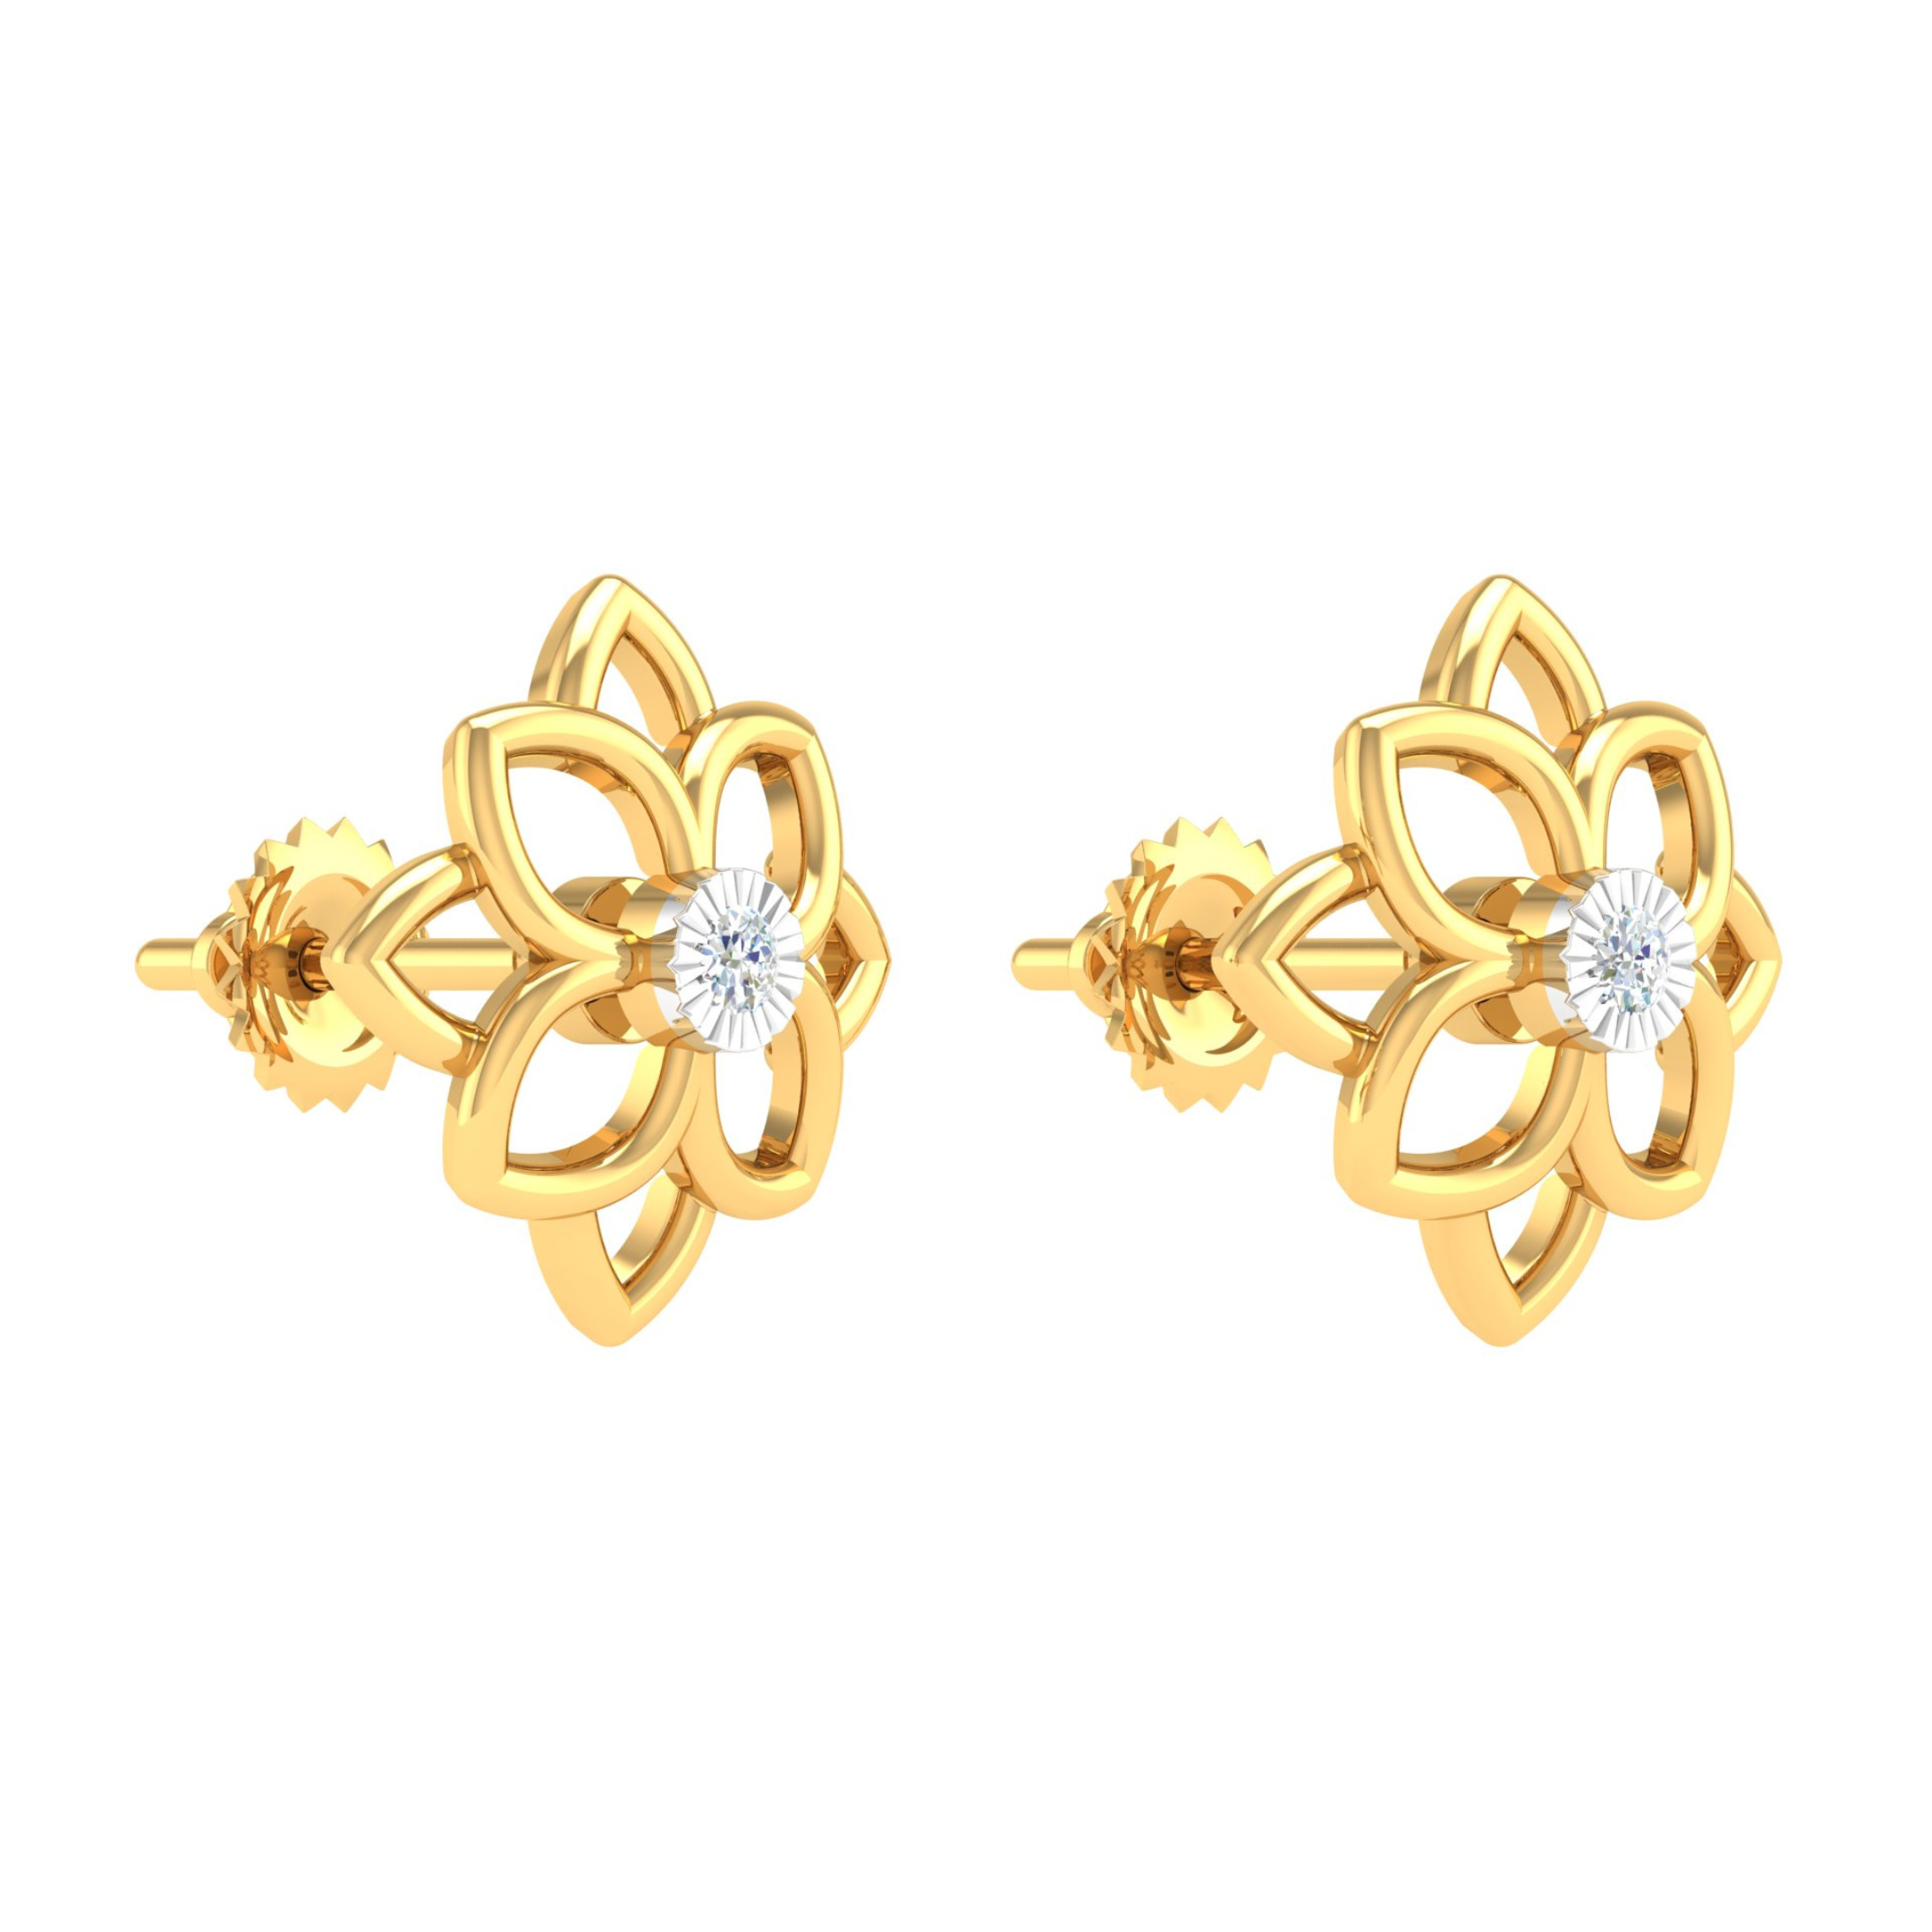 18KT YELLOW GOLD VICTORIA REAL DIAMOND EARRINGS